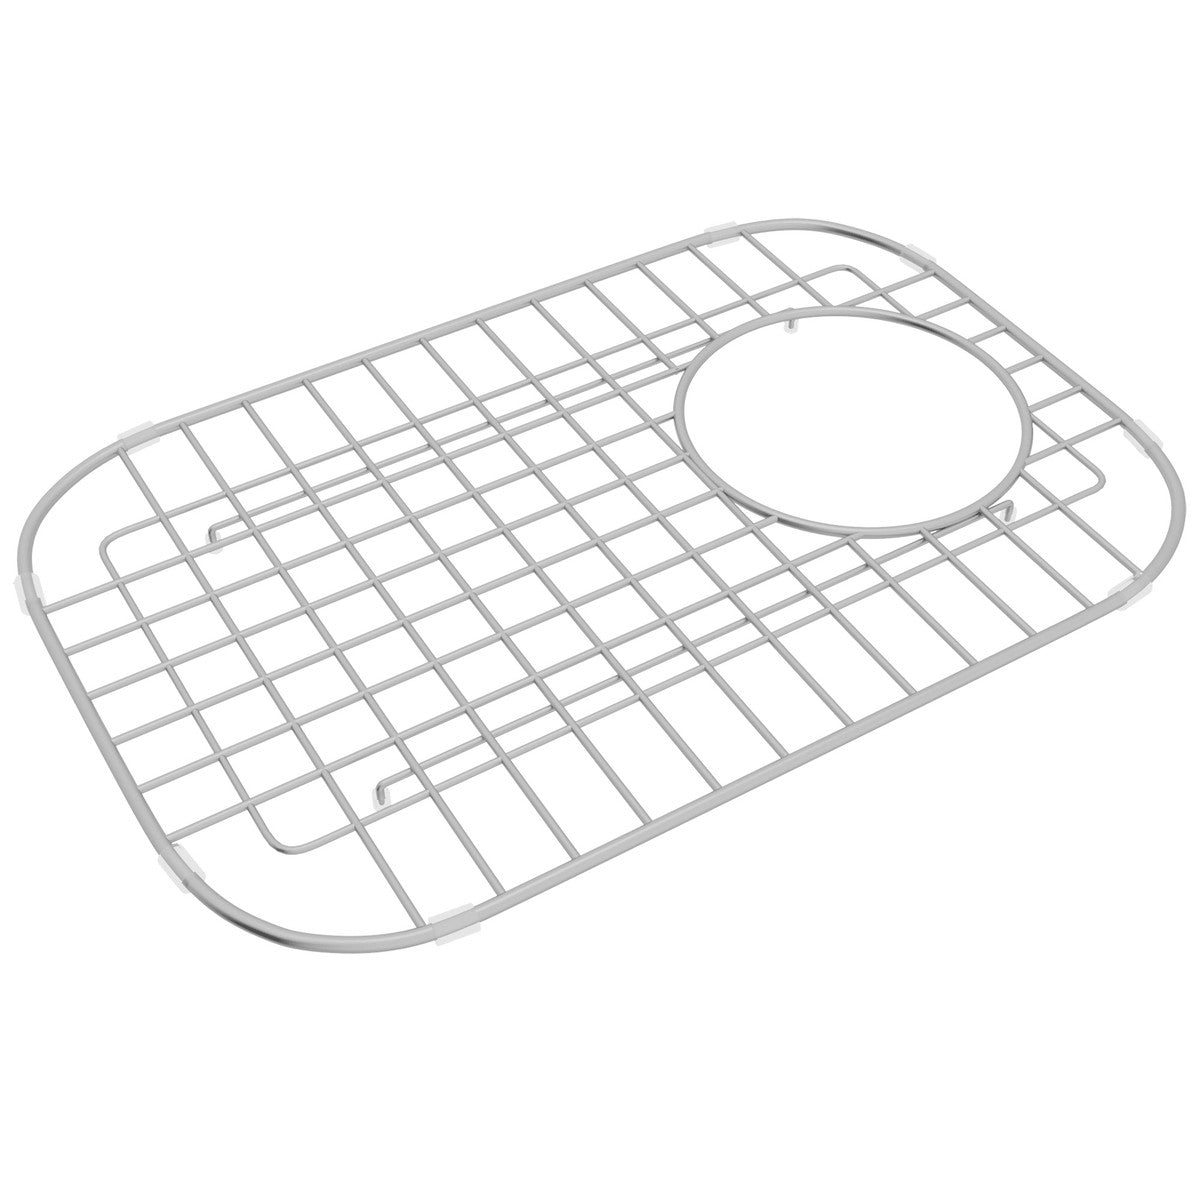 Rohl Allia Wire Sink Grid for 6337 Kitchen Sinks Small Bowl